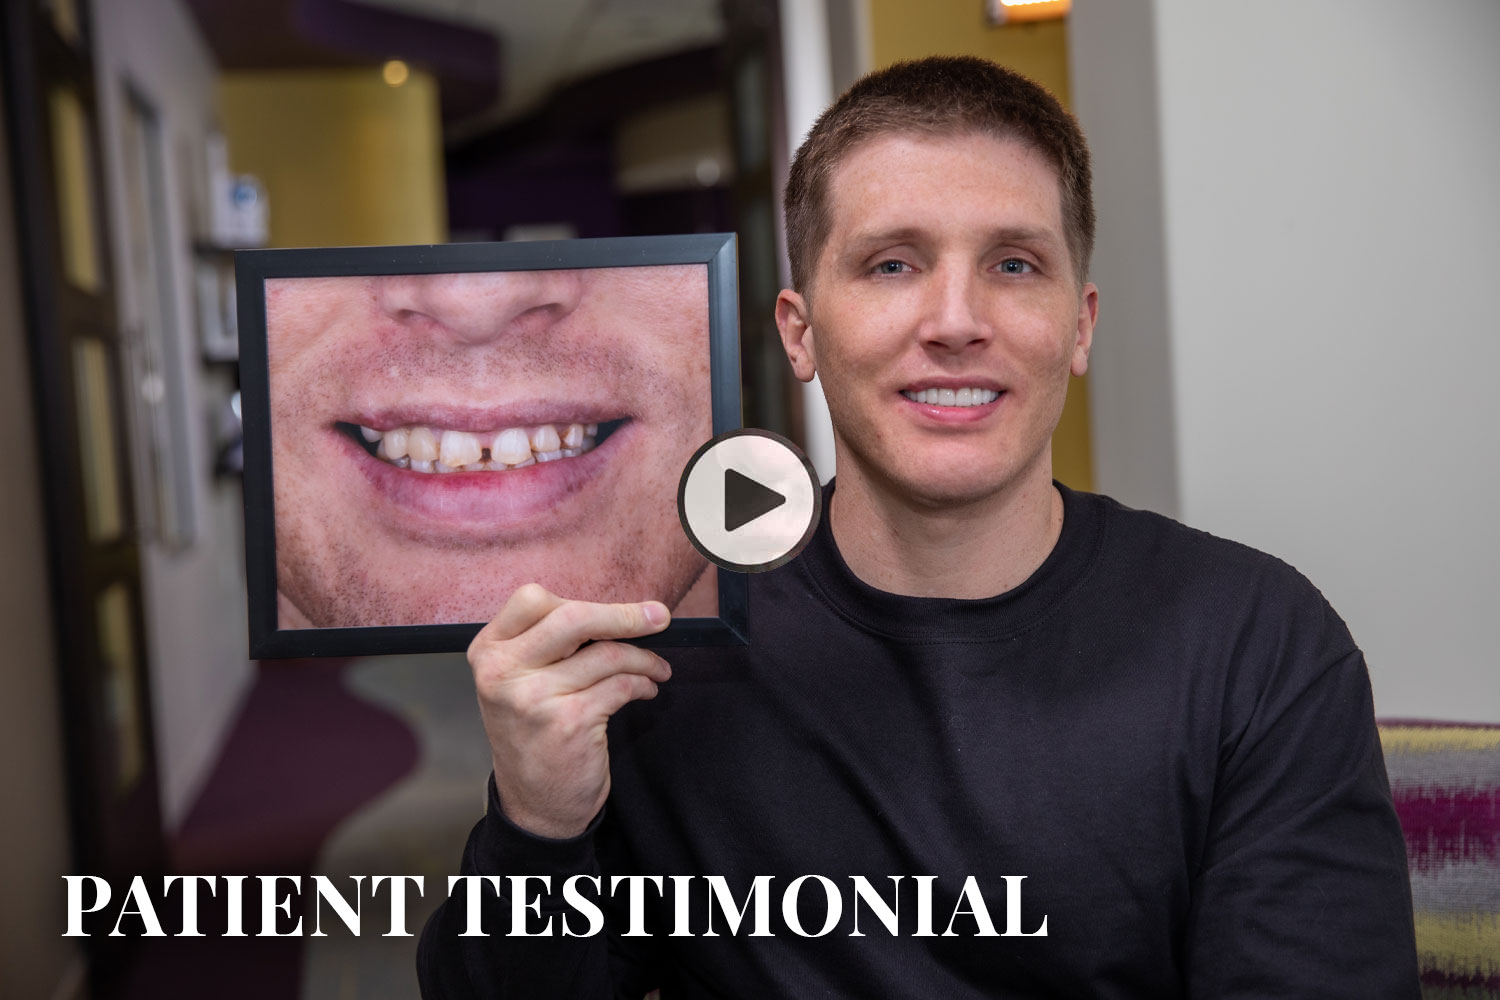 dr green patient testimonial video poster